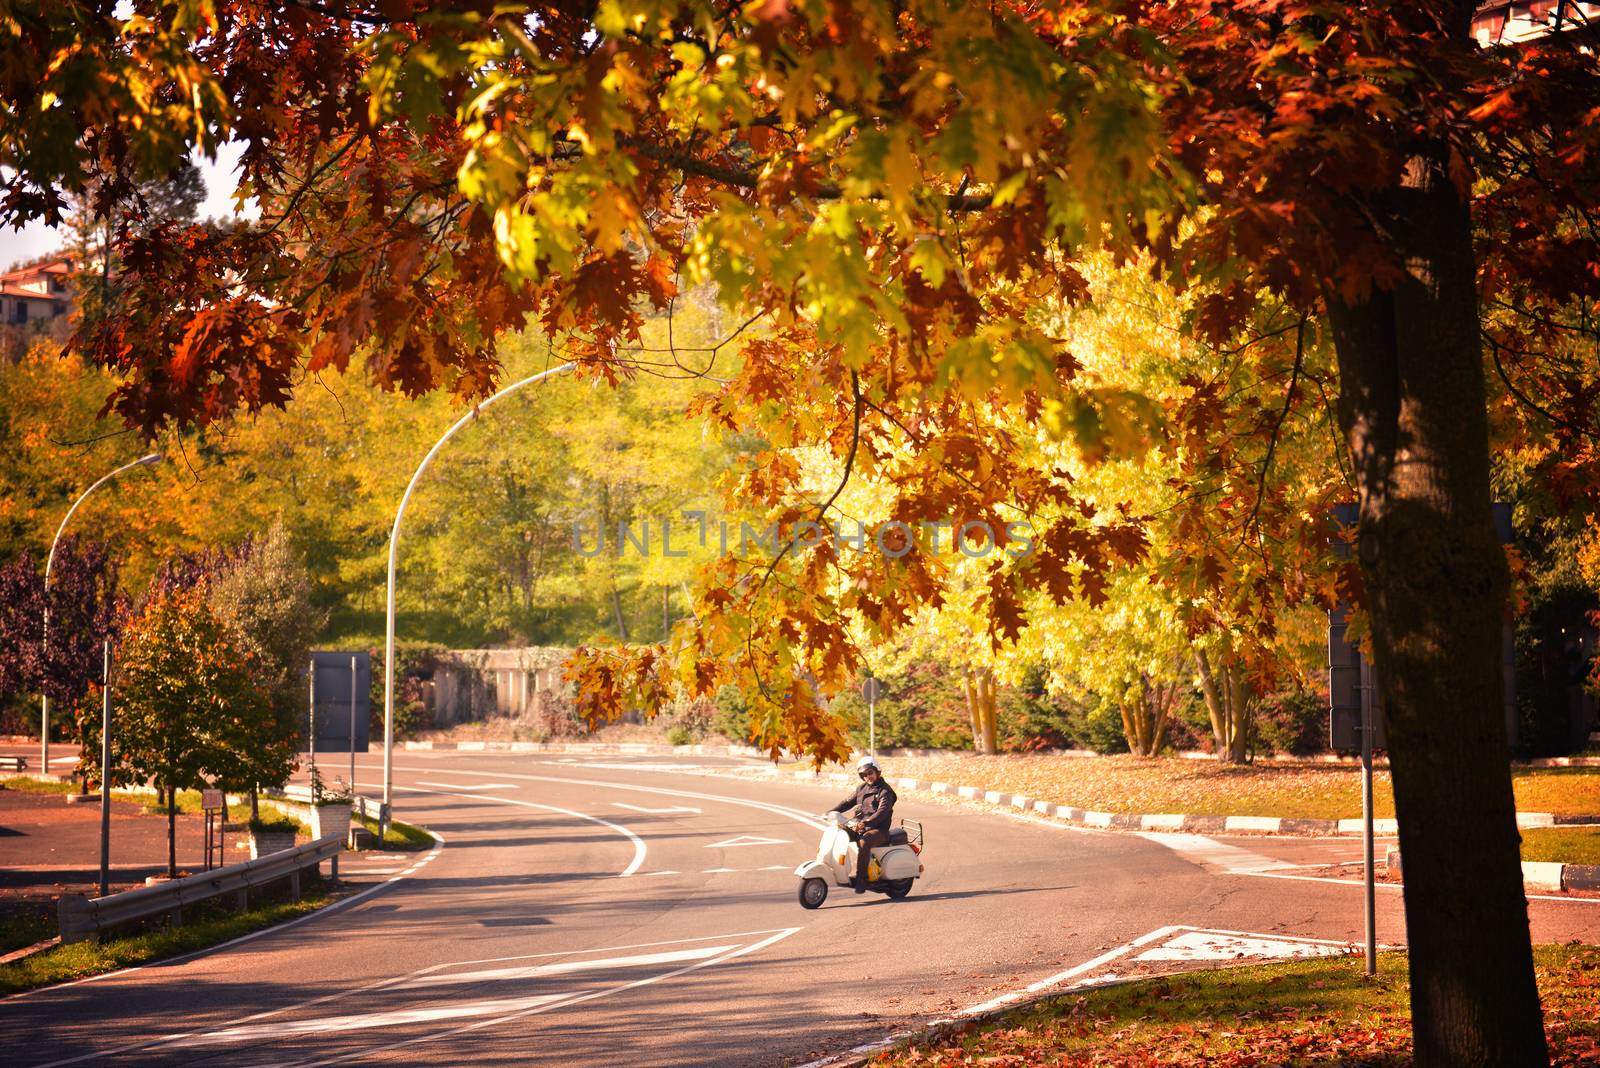 Man riding scooter. Man fun on motorbike ride on his empty way on an autumn, warm day. Transportation and travel for young adult. Tourist exploring town by bike.